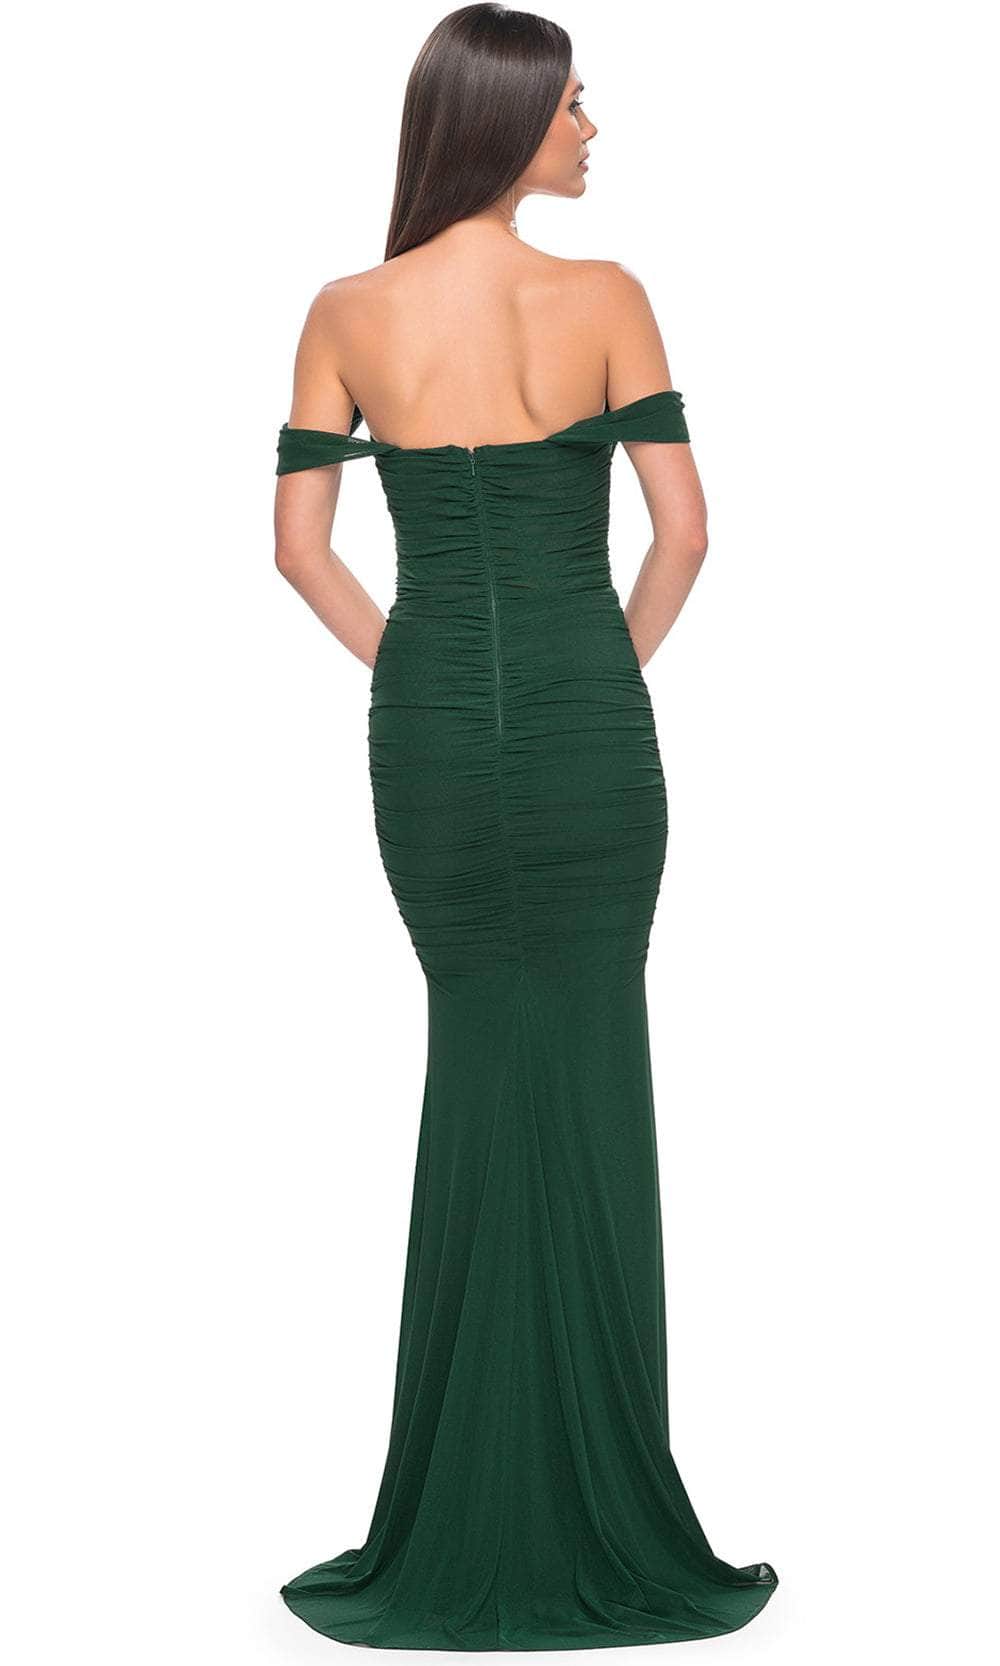 La Femme 31914 - Ruched Bustier Prom Dress Special Occasion Dresses